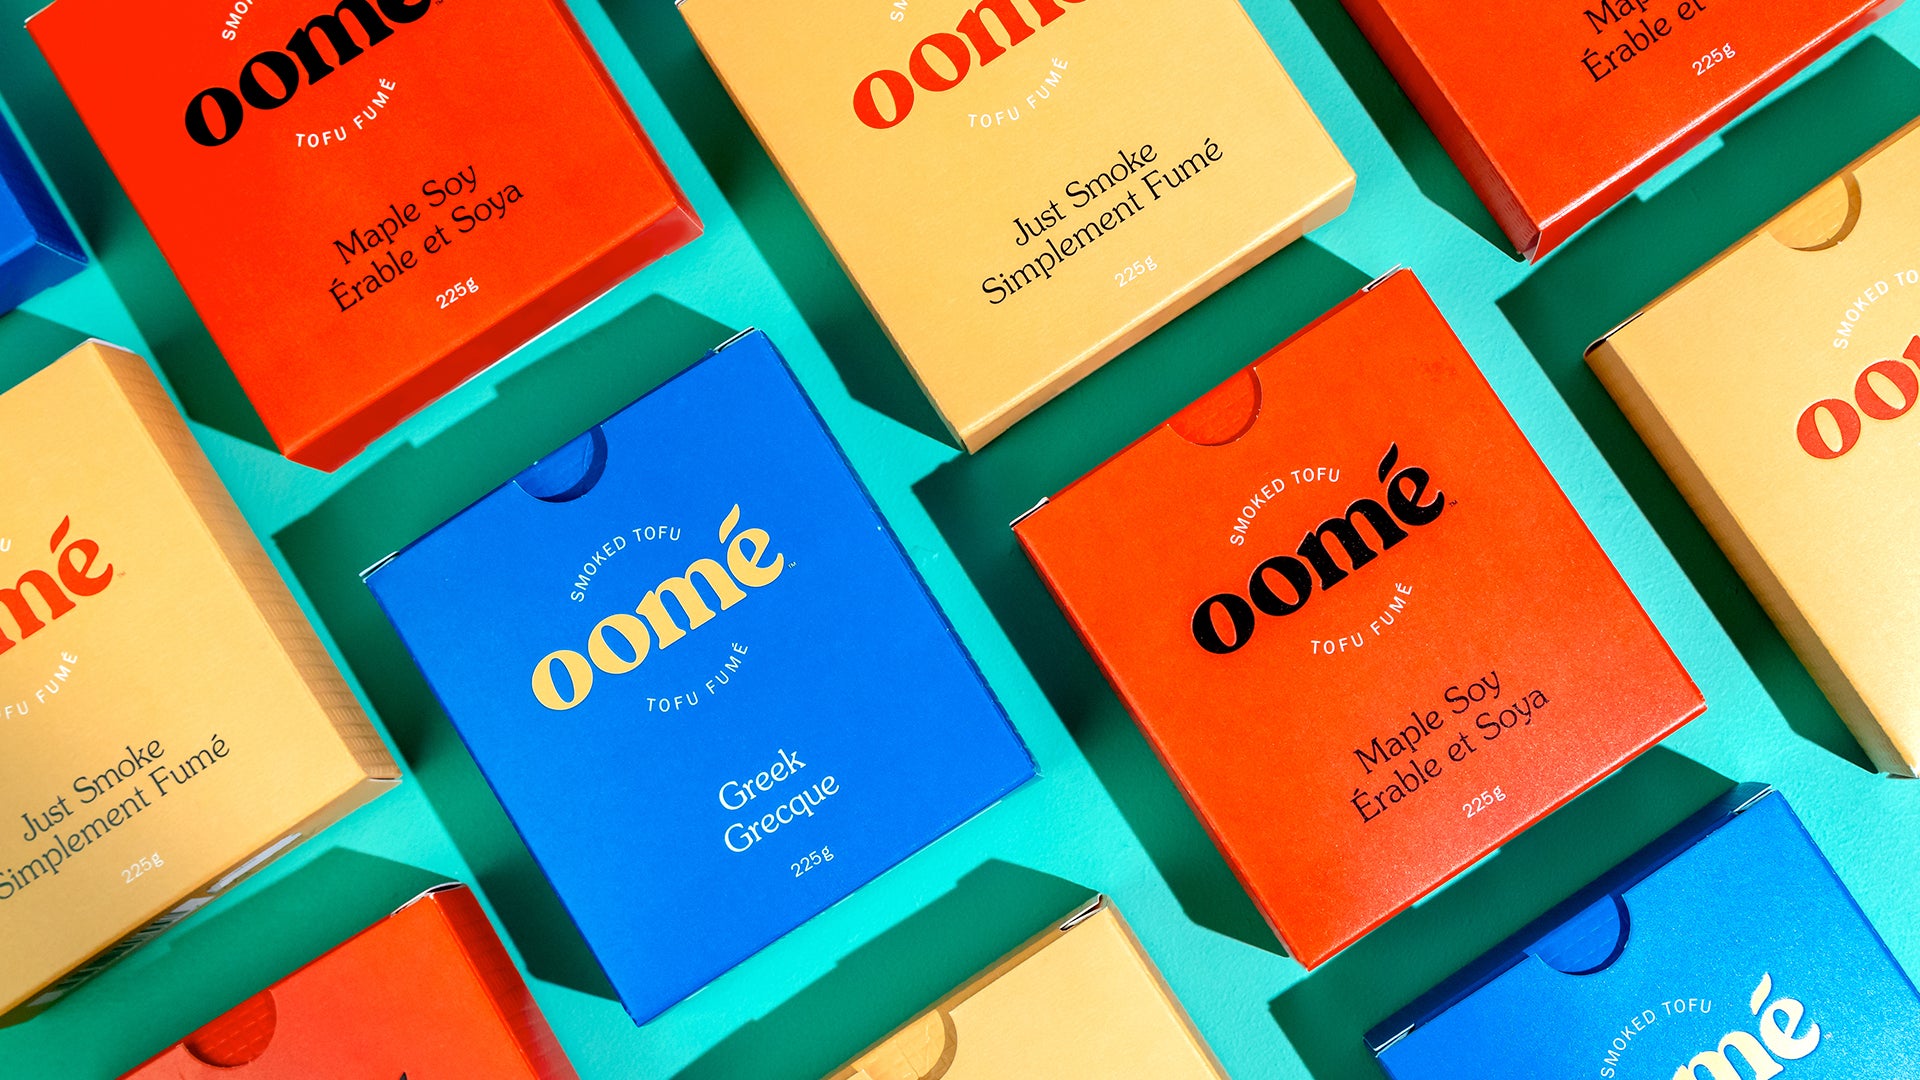 oome smoked tofu packaging top down in a grid format, greek, maple soy and just smoke flavours